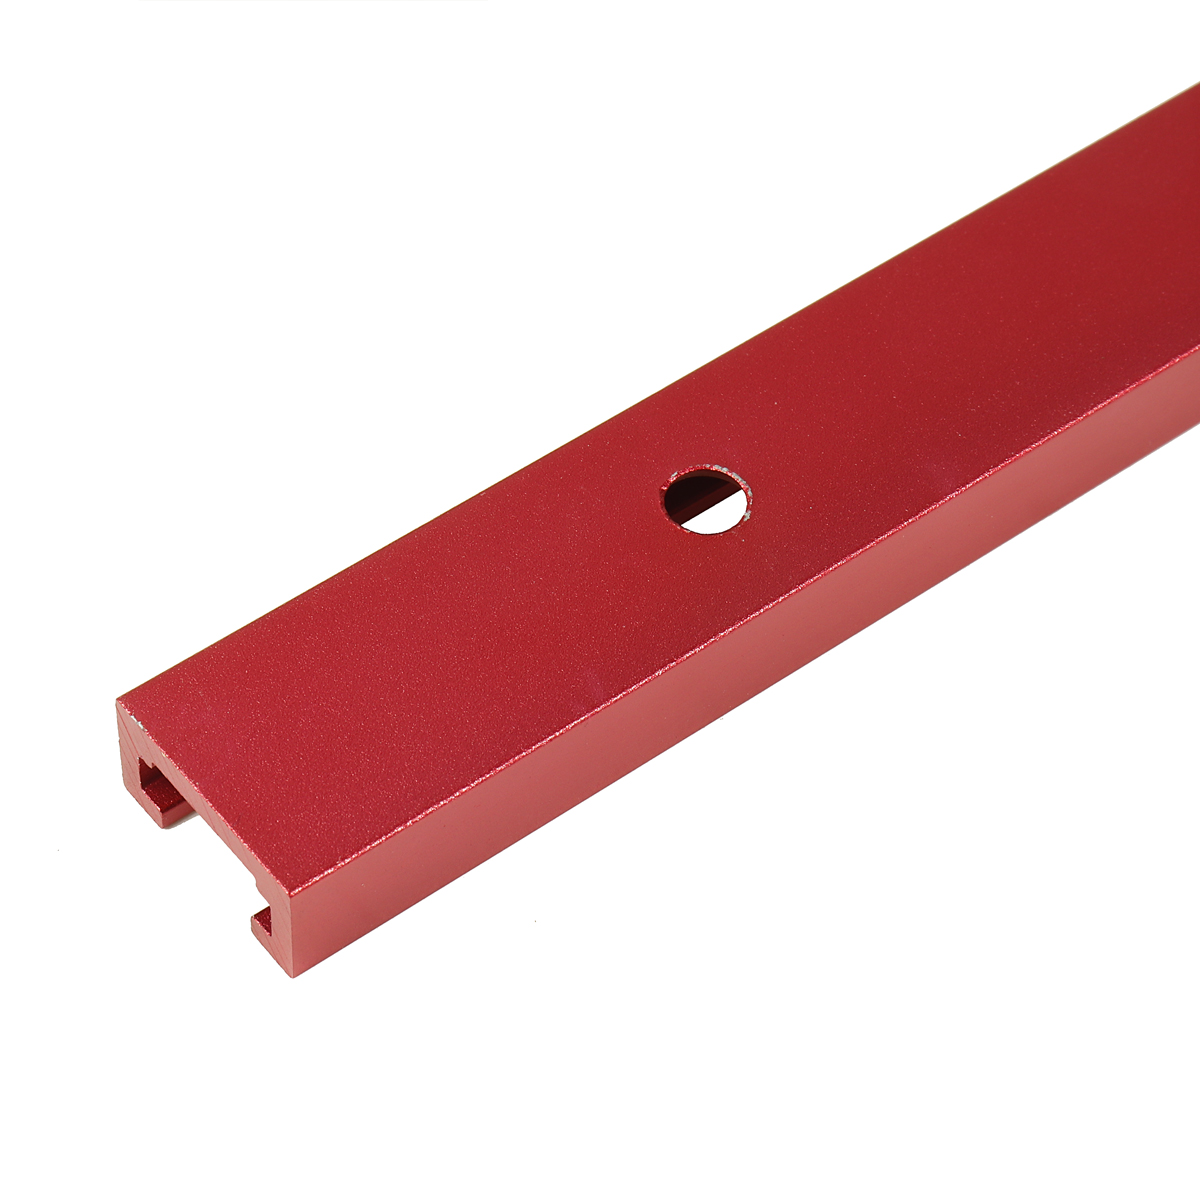 Red-Aluminum-Alloy-300-1220mm-T-track-T-slot-Miter-Track-Jig-T-Screw-Fixture-Slot-19x95mm-For-Table--1682608-8